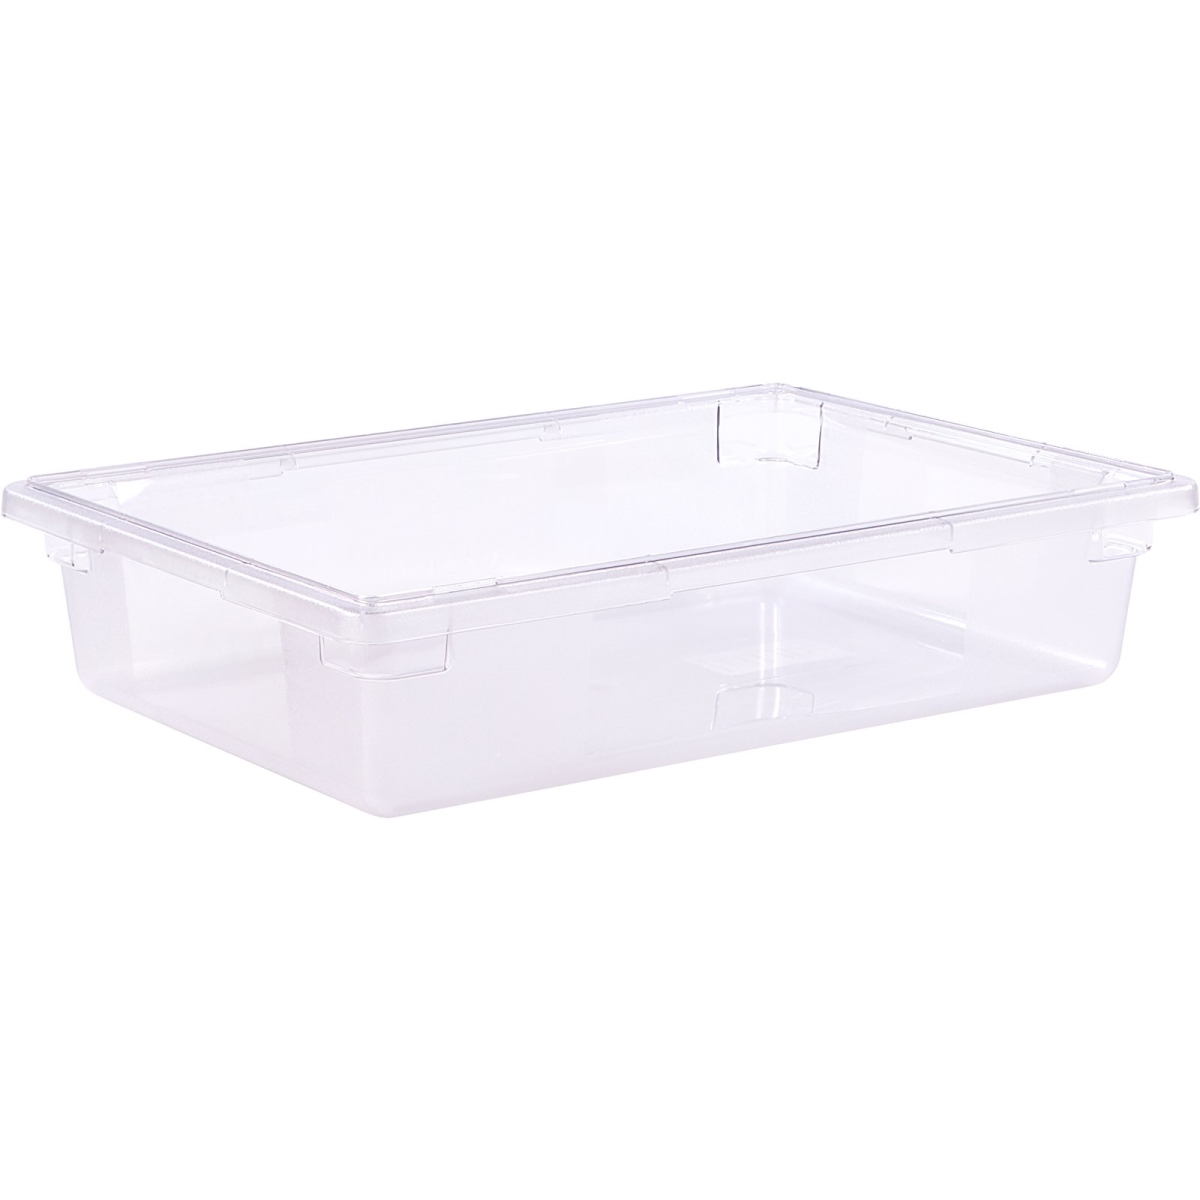 Picture of Carlisle Foodservice Products CFS1062807 18 x 26 in. Clear Colander Food Box